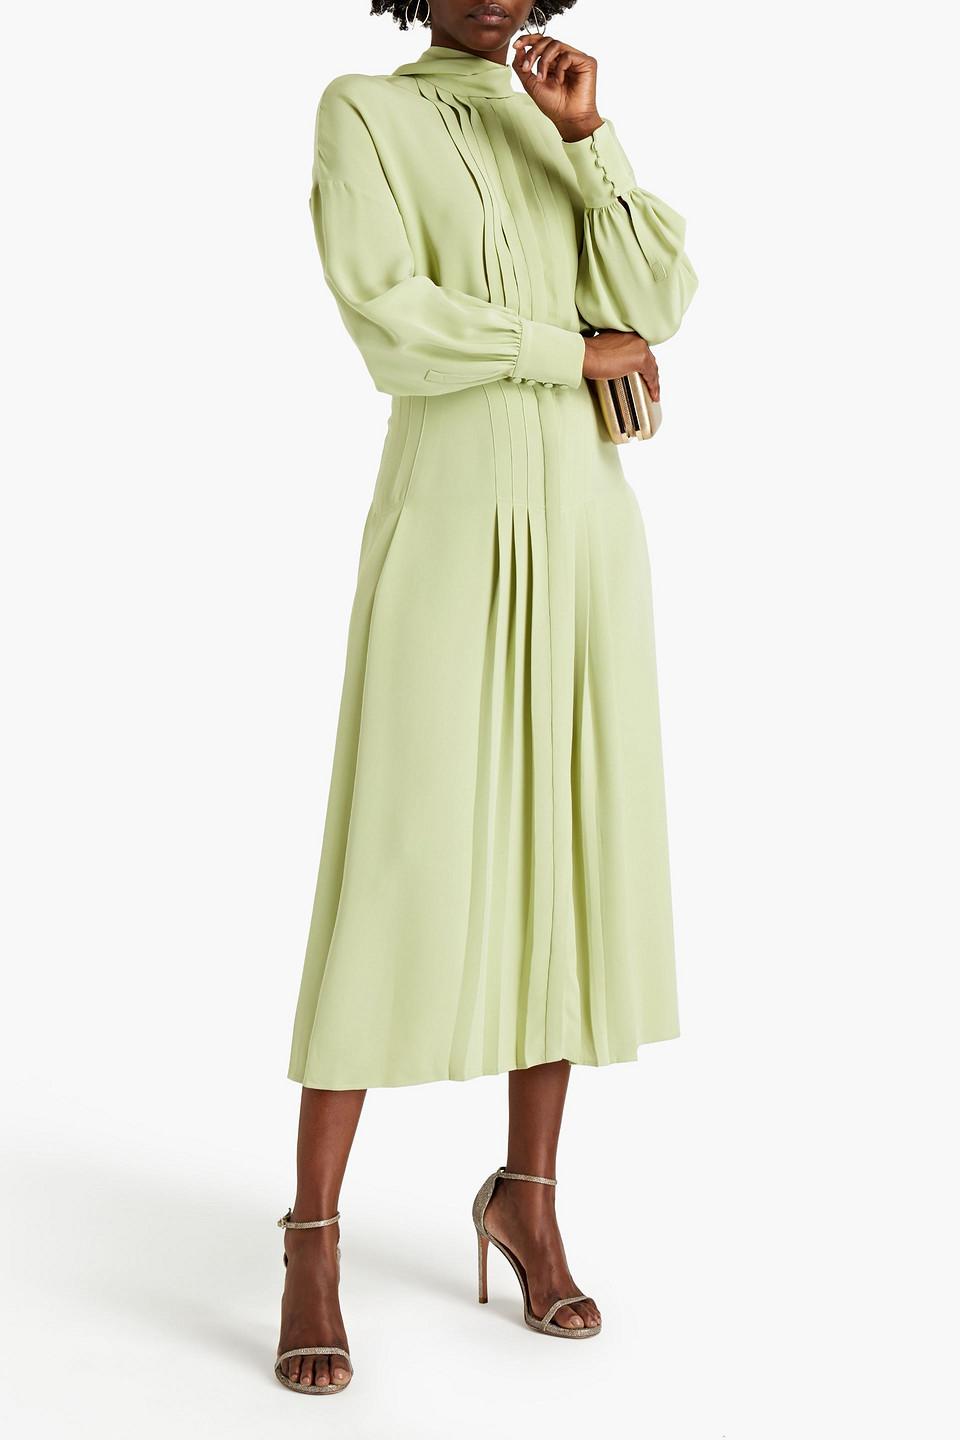 Valentino Pussy-bow Pintucked Silk-satin Crepe Midi Dress in Green | Lyst